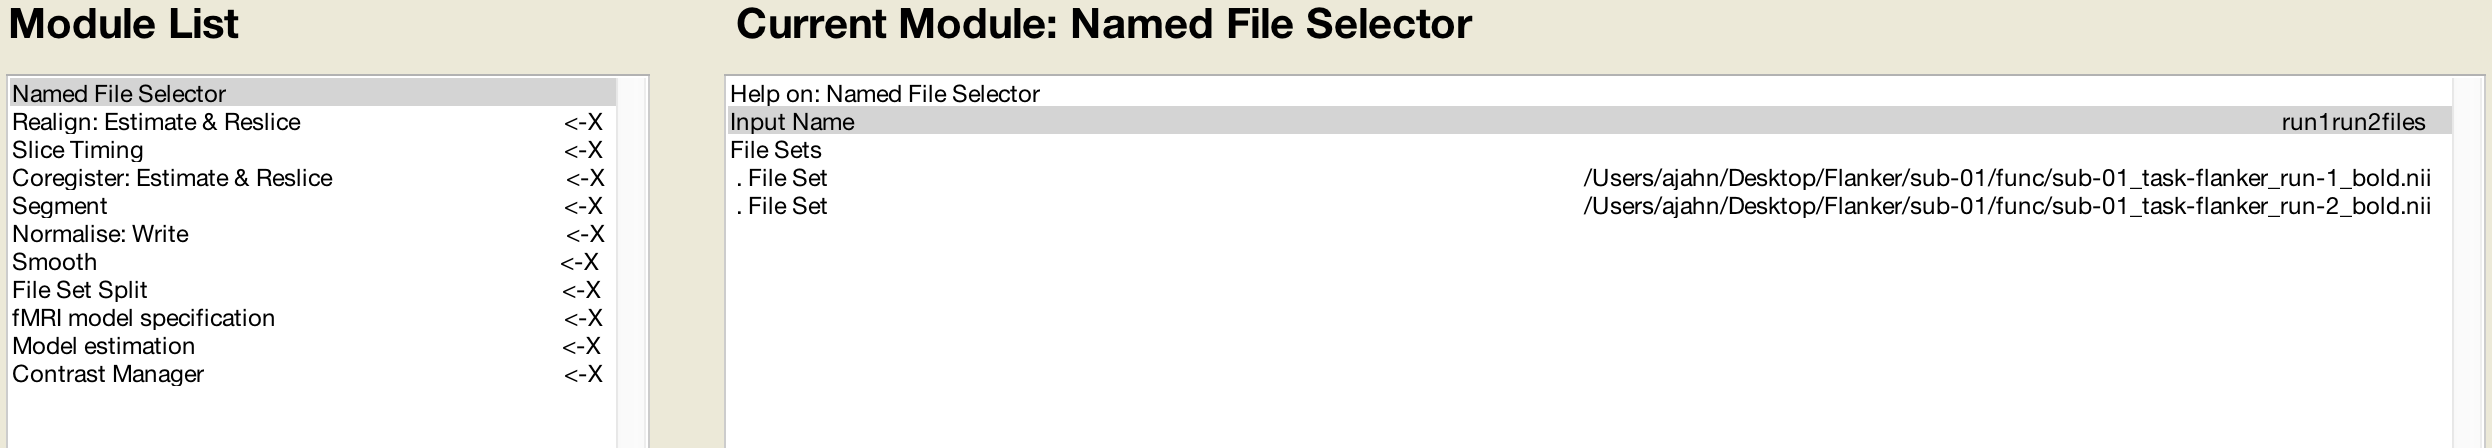 ../../_images/06_NamedFileSelector.png